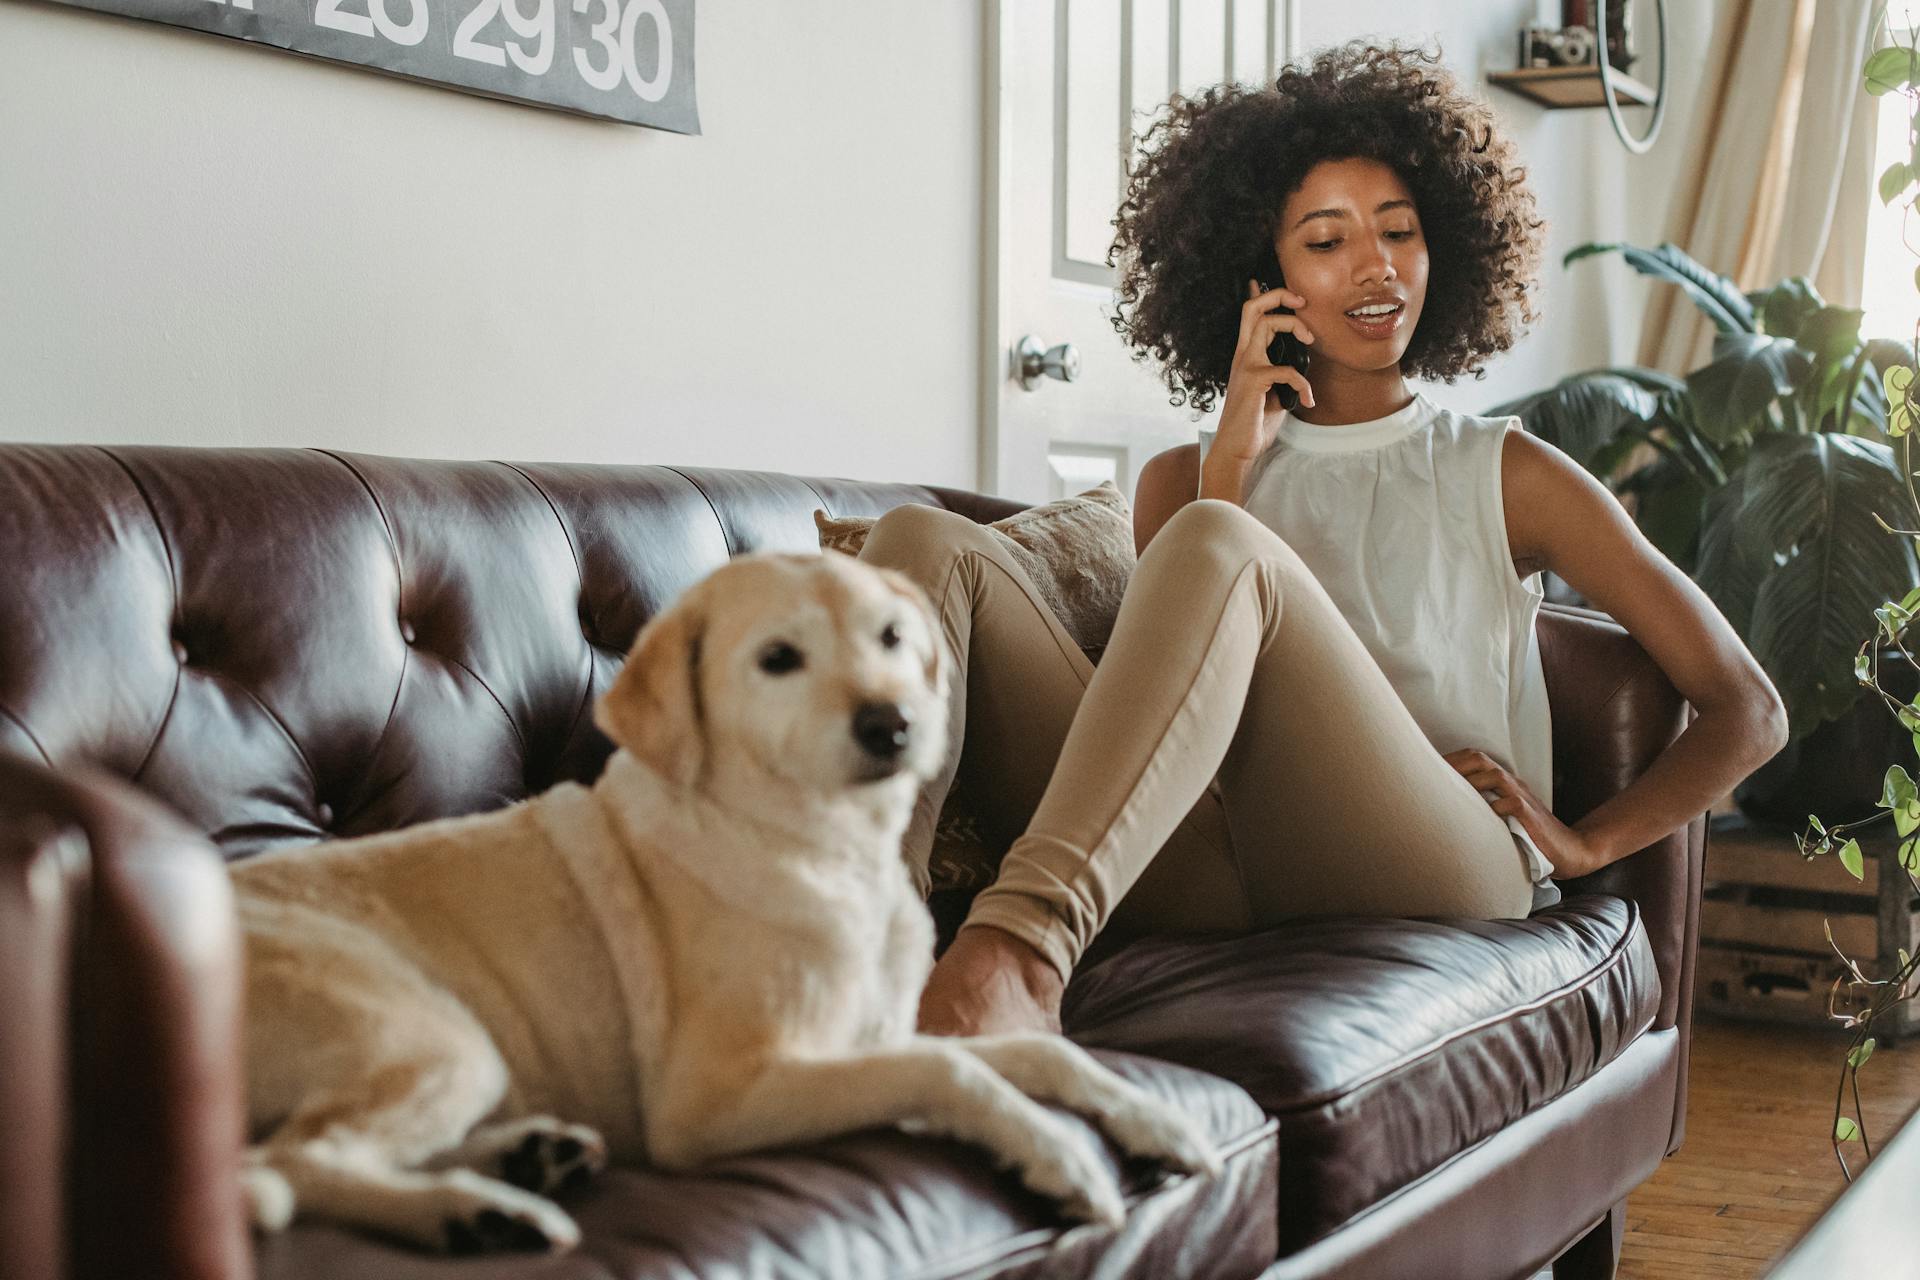 A woman on a phone call | Source: Pexels